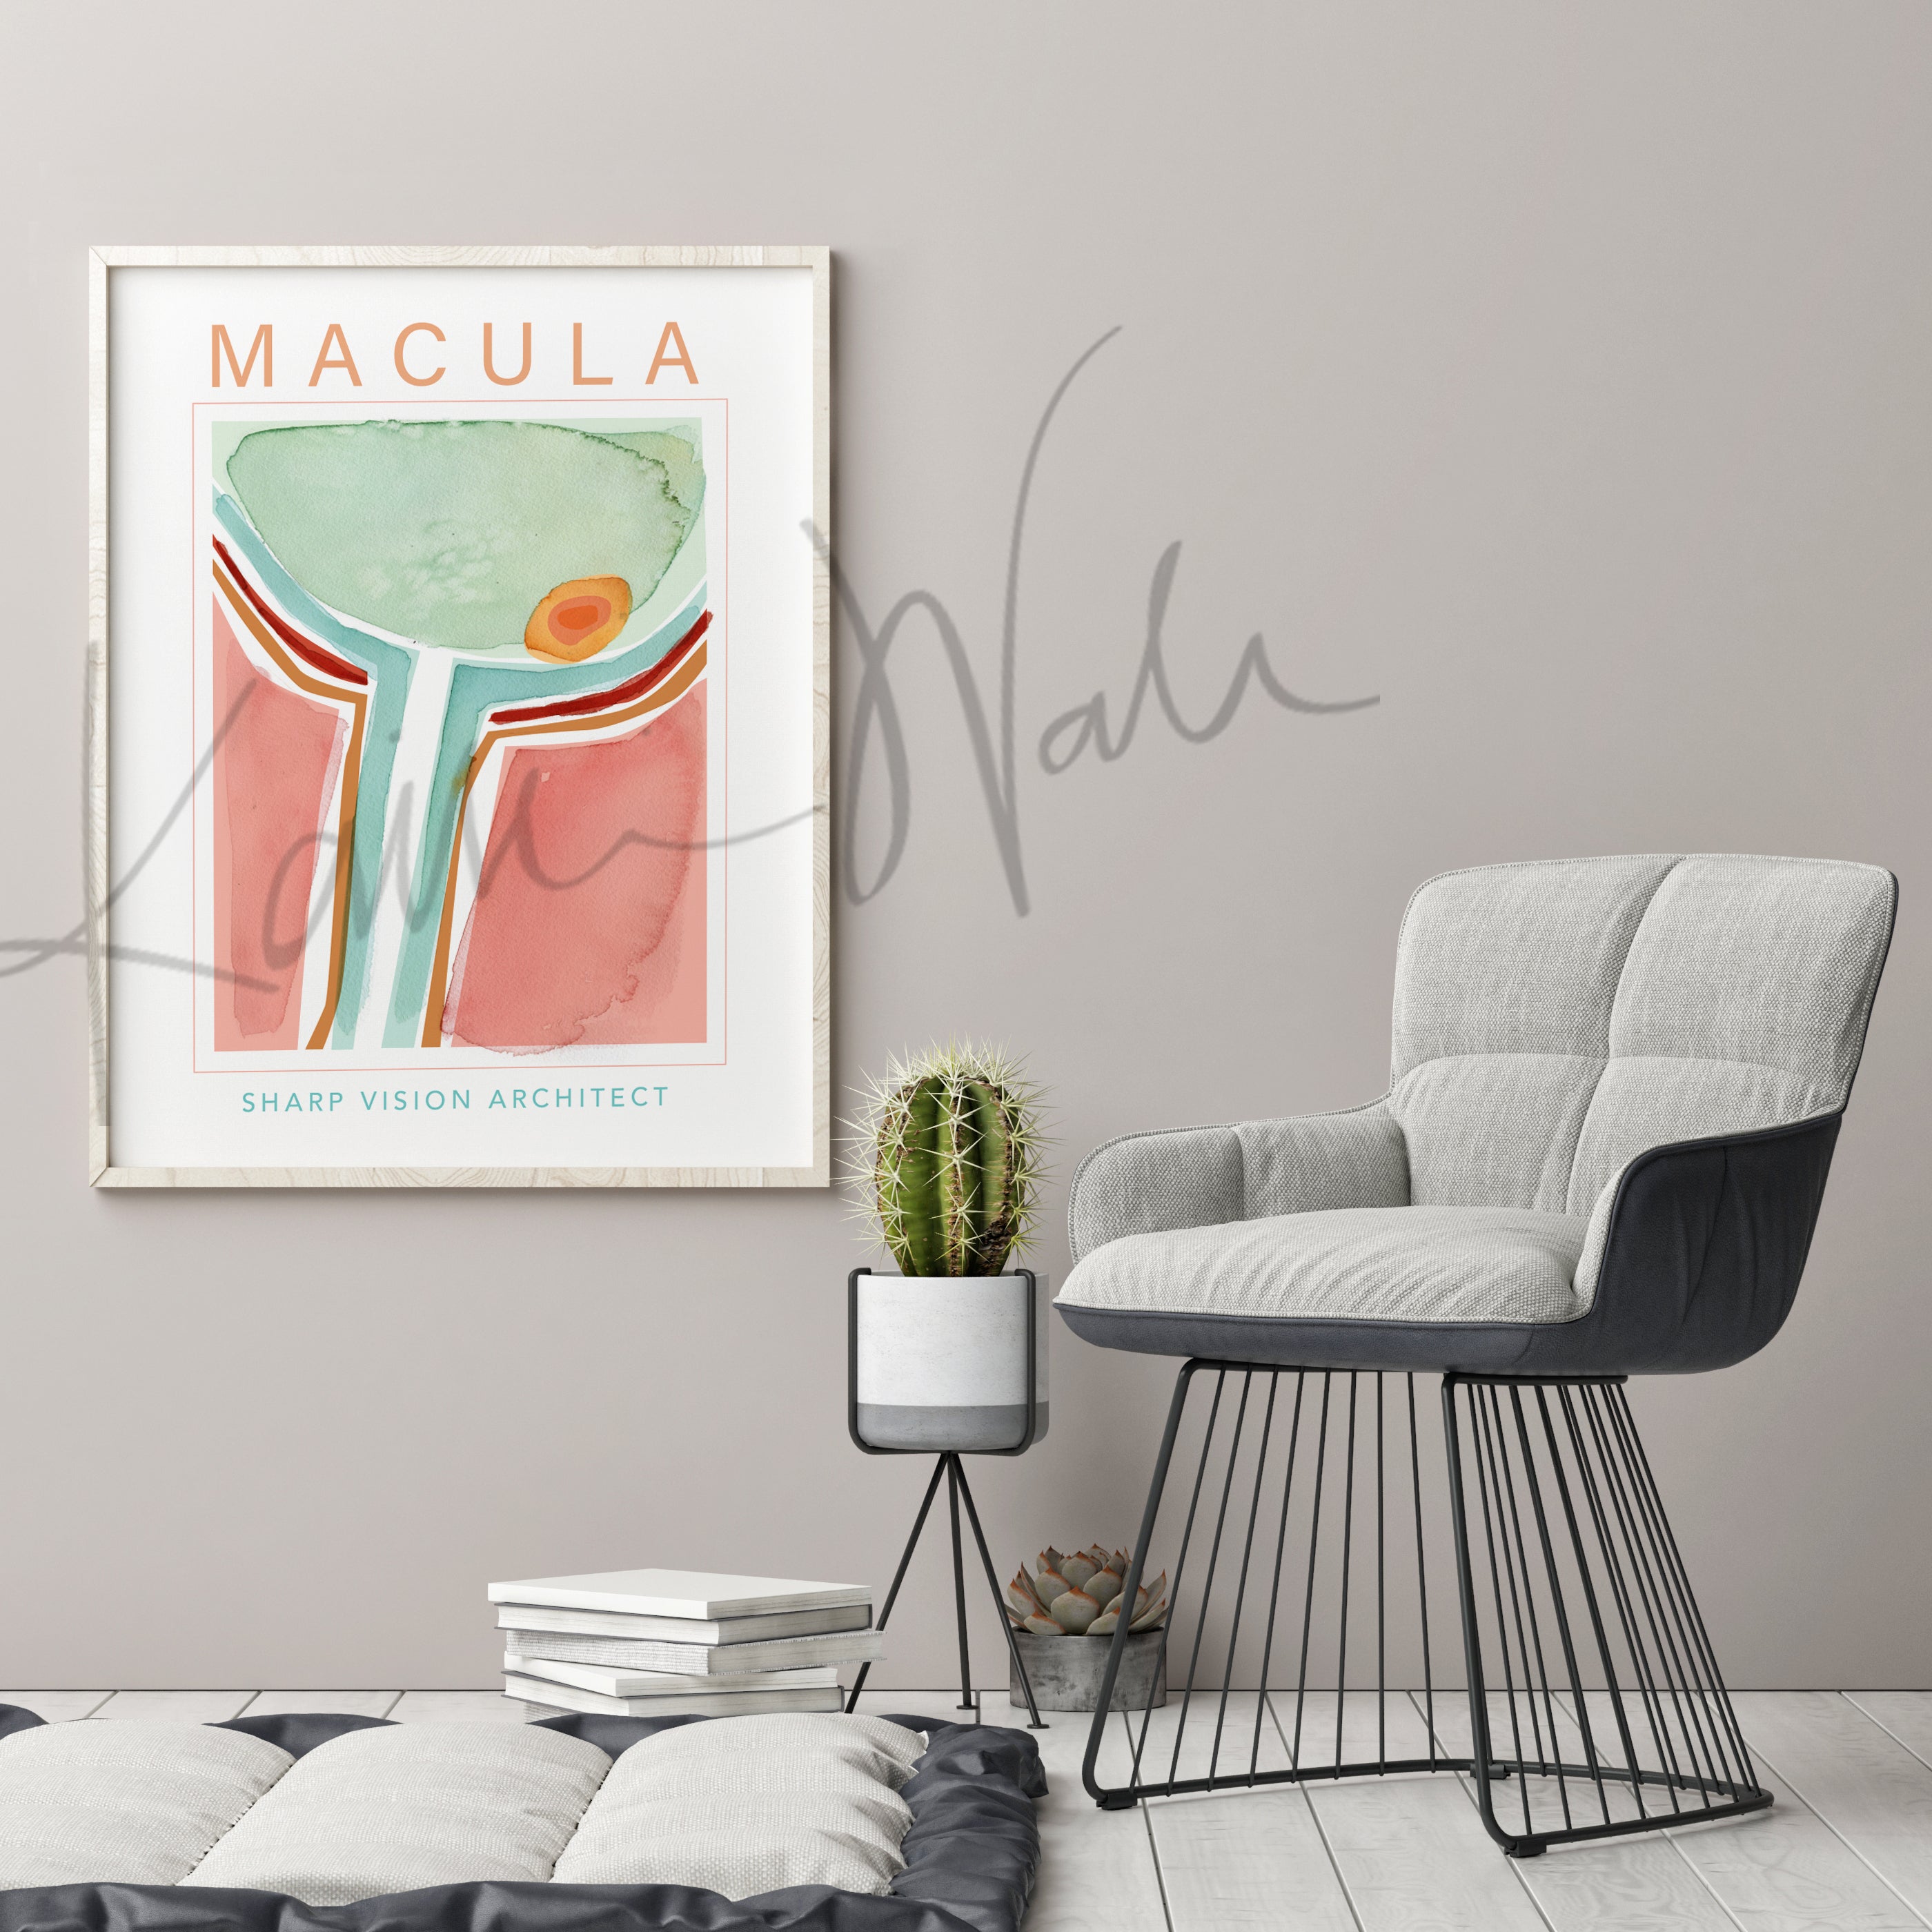 Framed contemporary poster design of the lens in teal, brown, orange, and gray. The painting is hanging on a gray wall over a gray chair and a cactus.